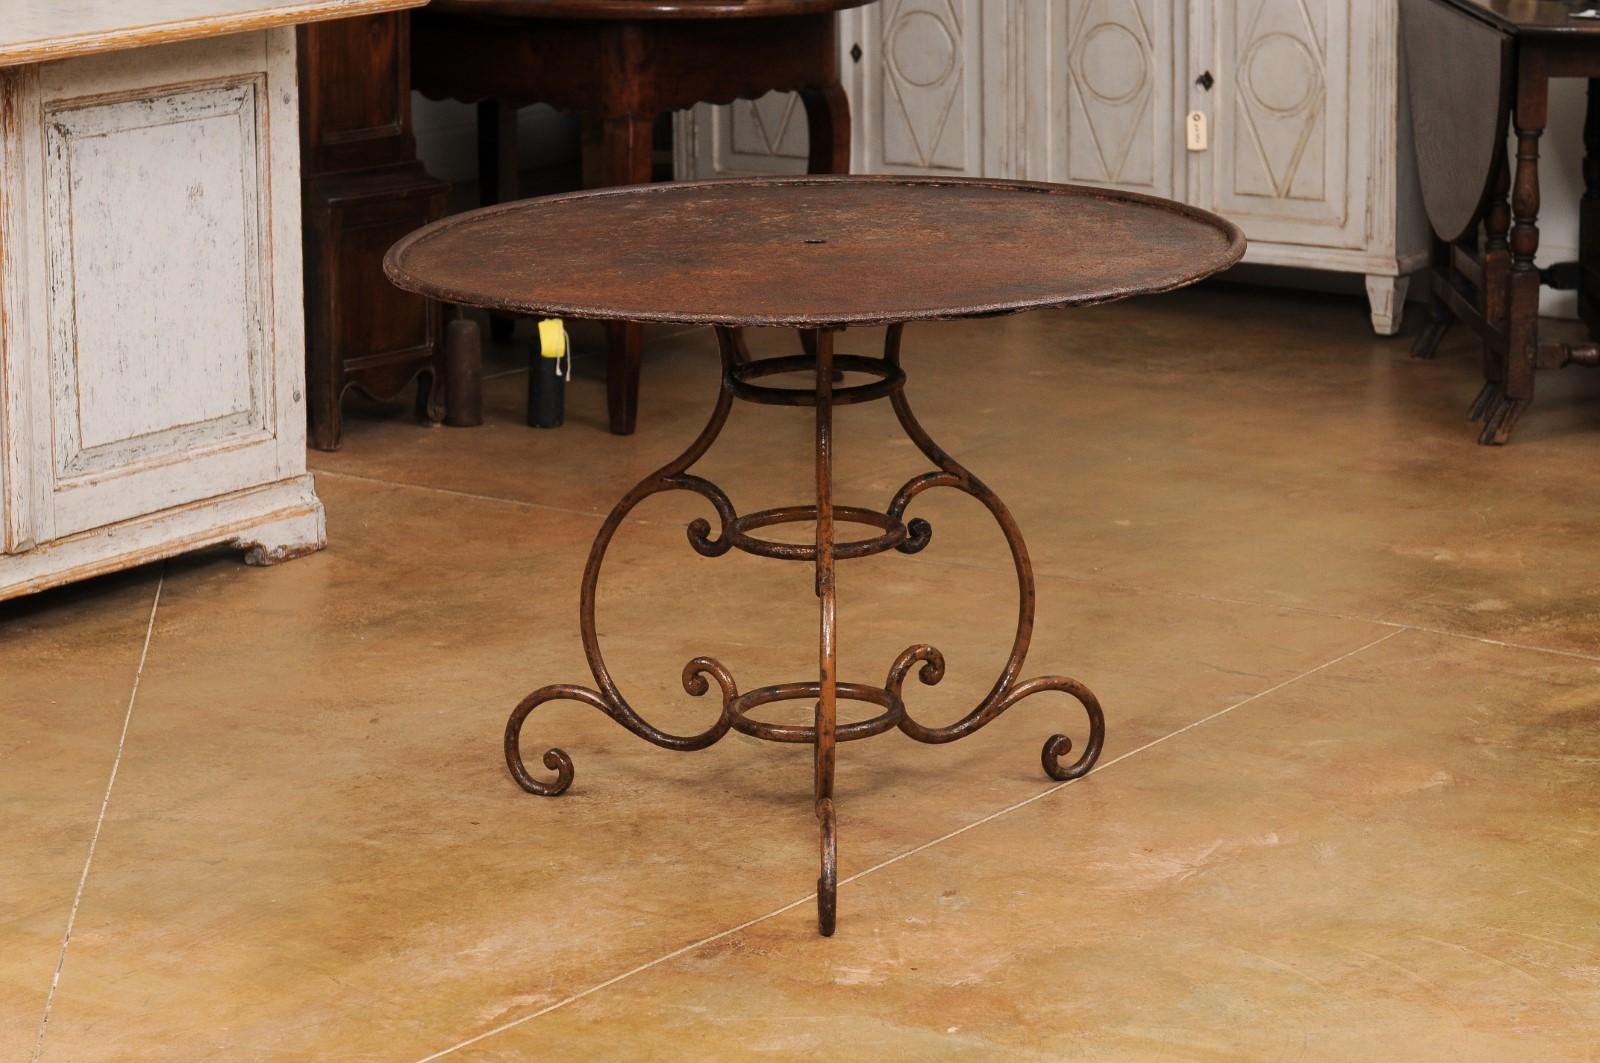 French 19th Century Round Iron Garden Table with Scrolling Base and Rusty Finish For Sale 6